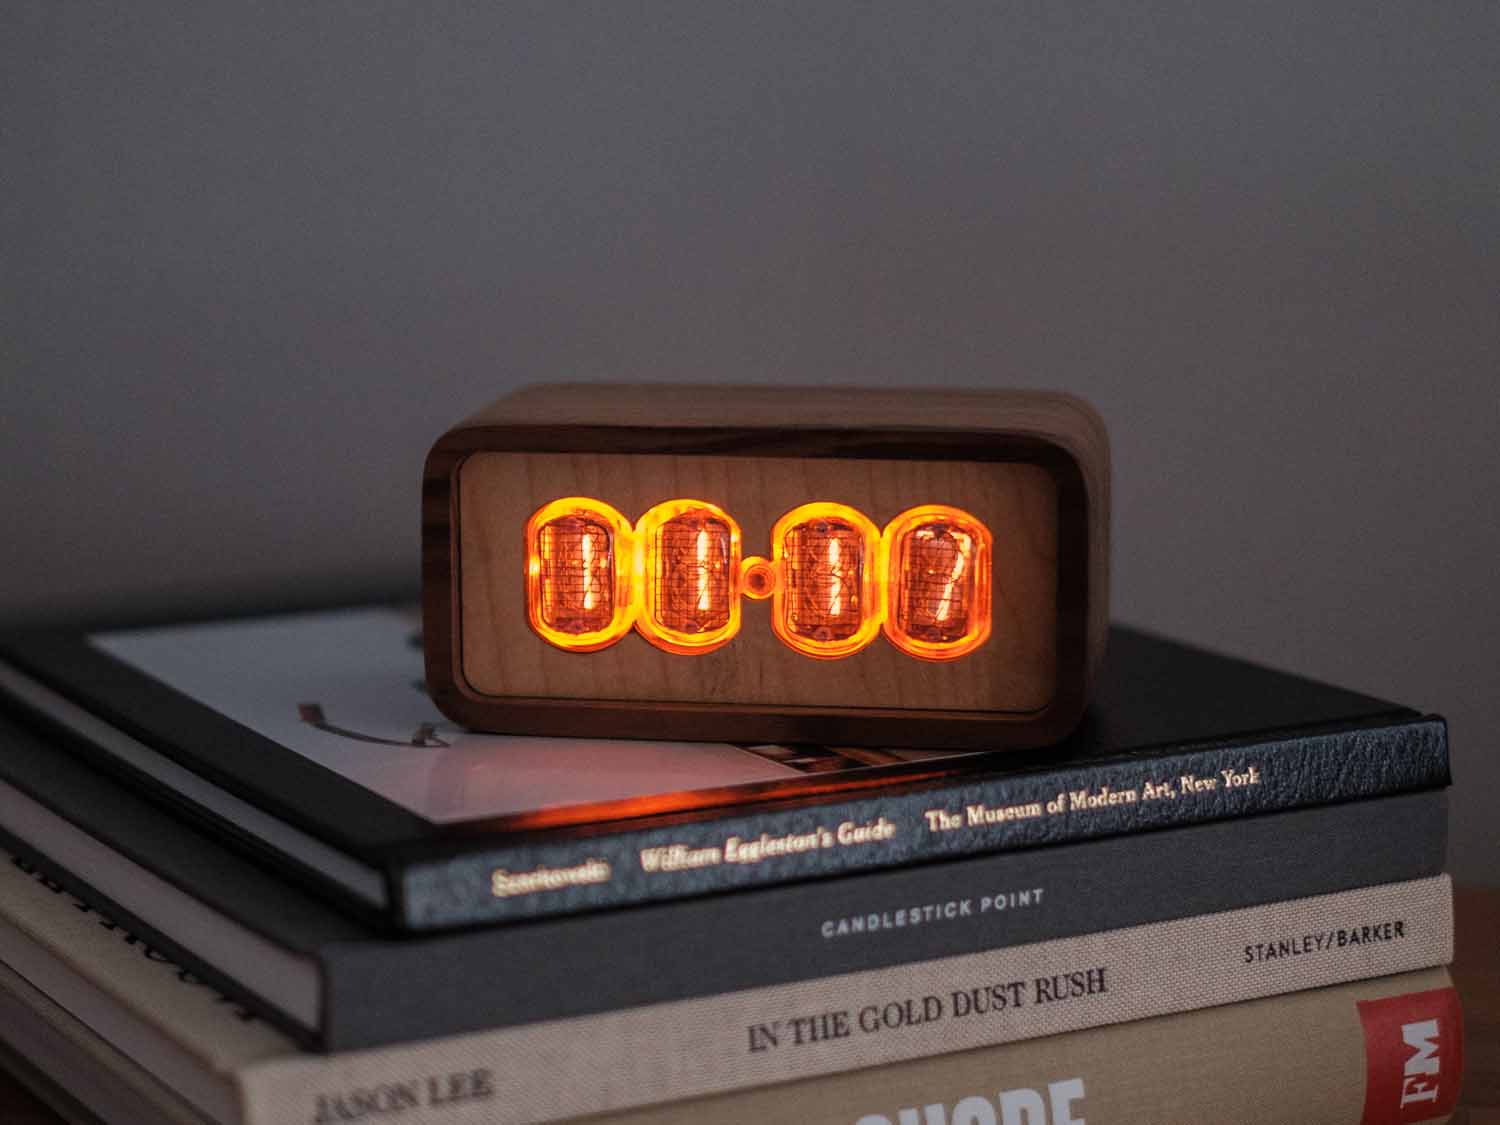 Clock sits on a stack of books and is made from solid walnut with a contrasting maple face. The design uses retro Nixie tubes for a warm orange glow.